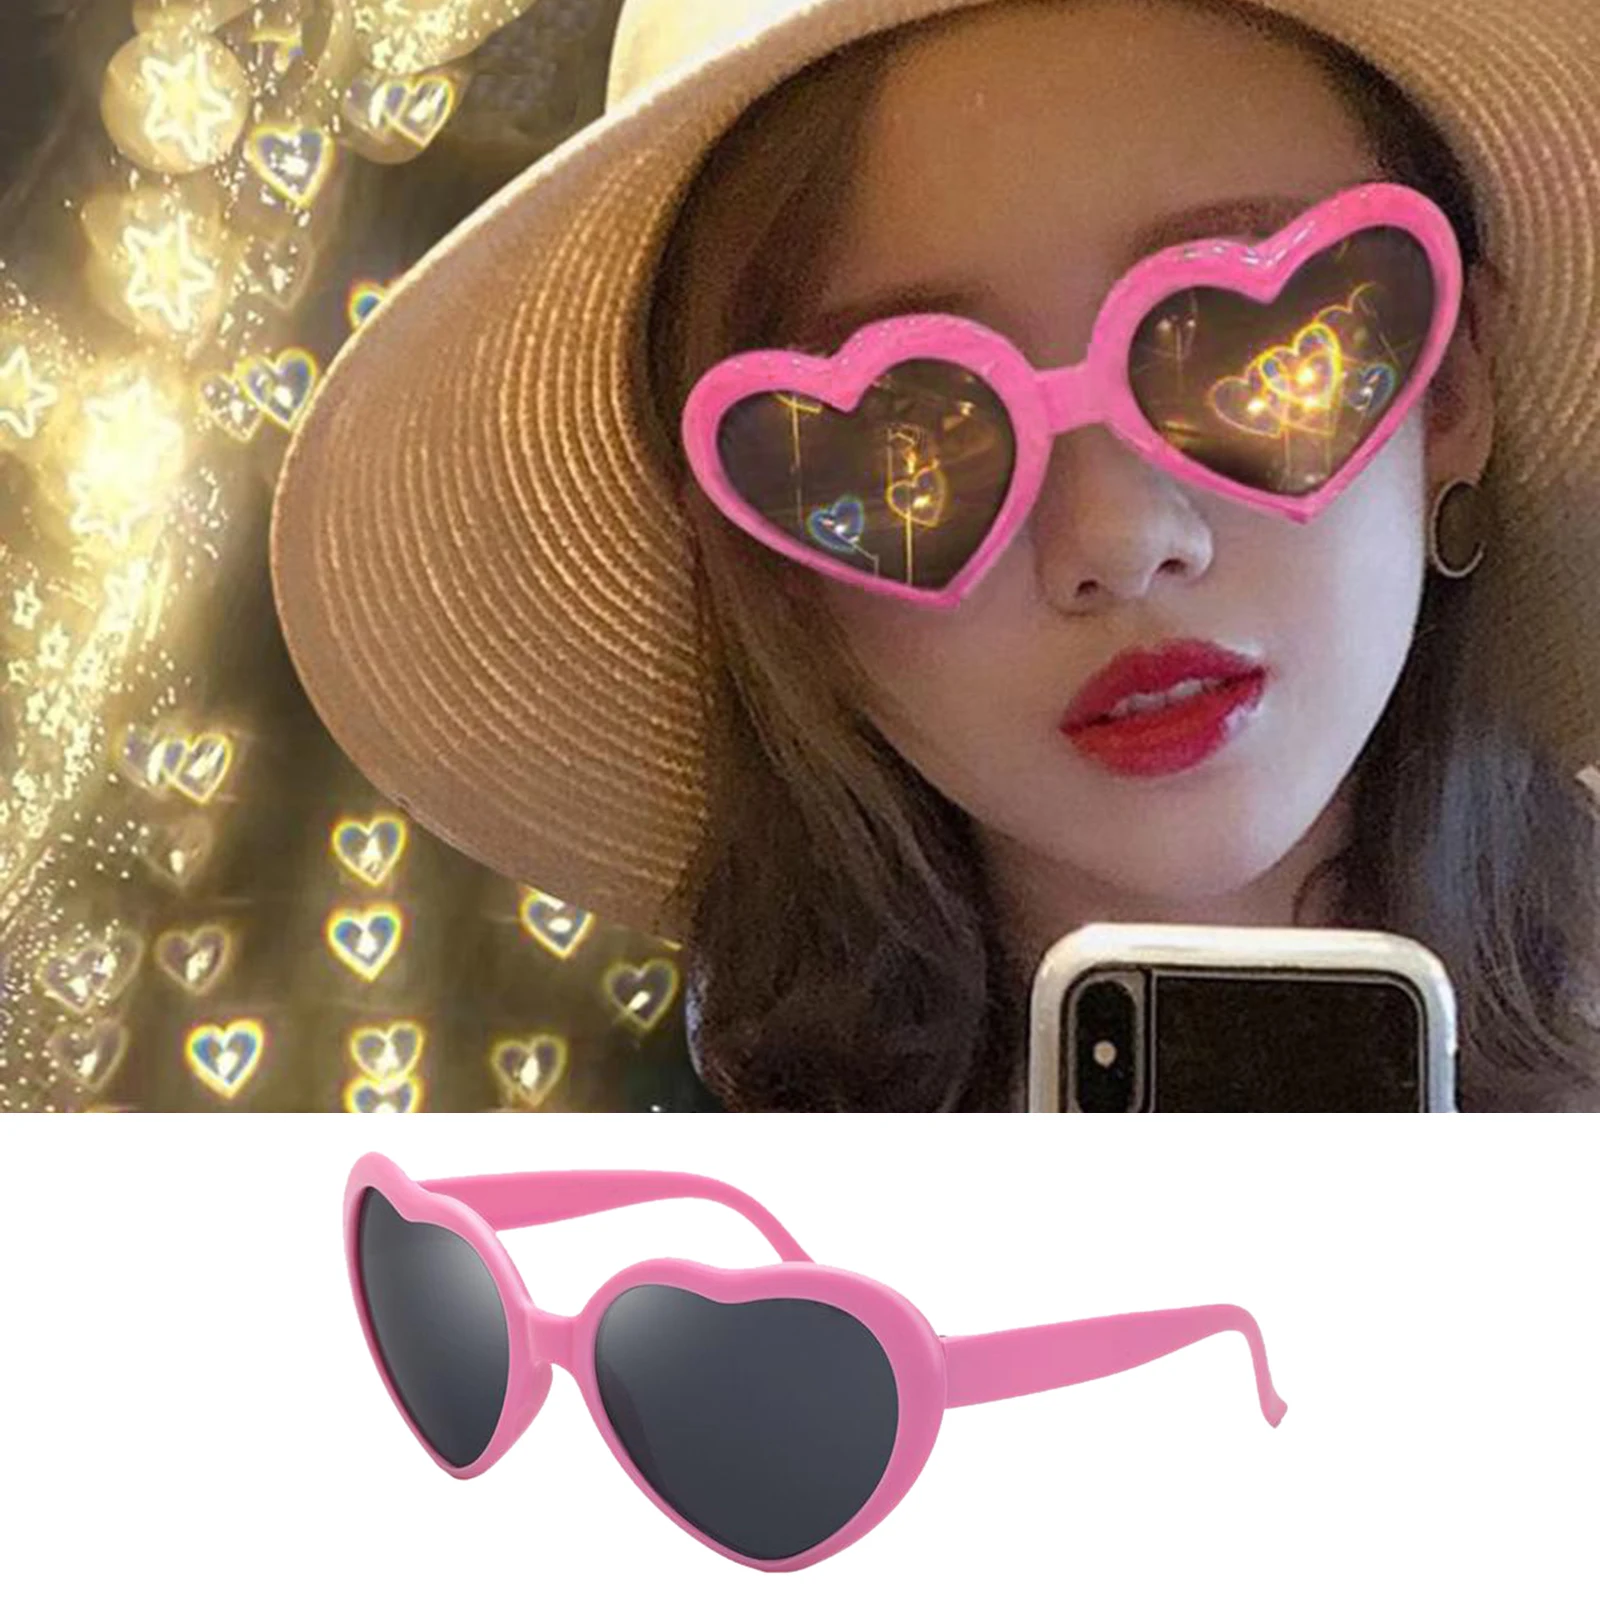 Special Effects Heart Shaped Sunglasses Love Fashion Eyewear Riding Glasses Fishing Glasses Sun Glasses for Women